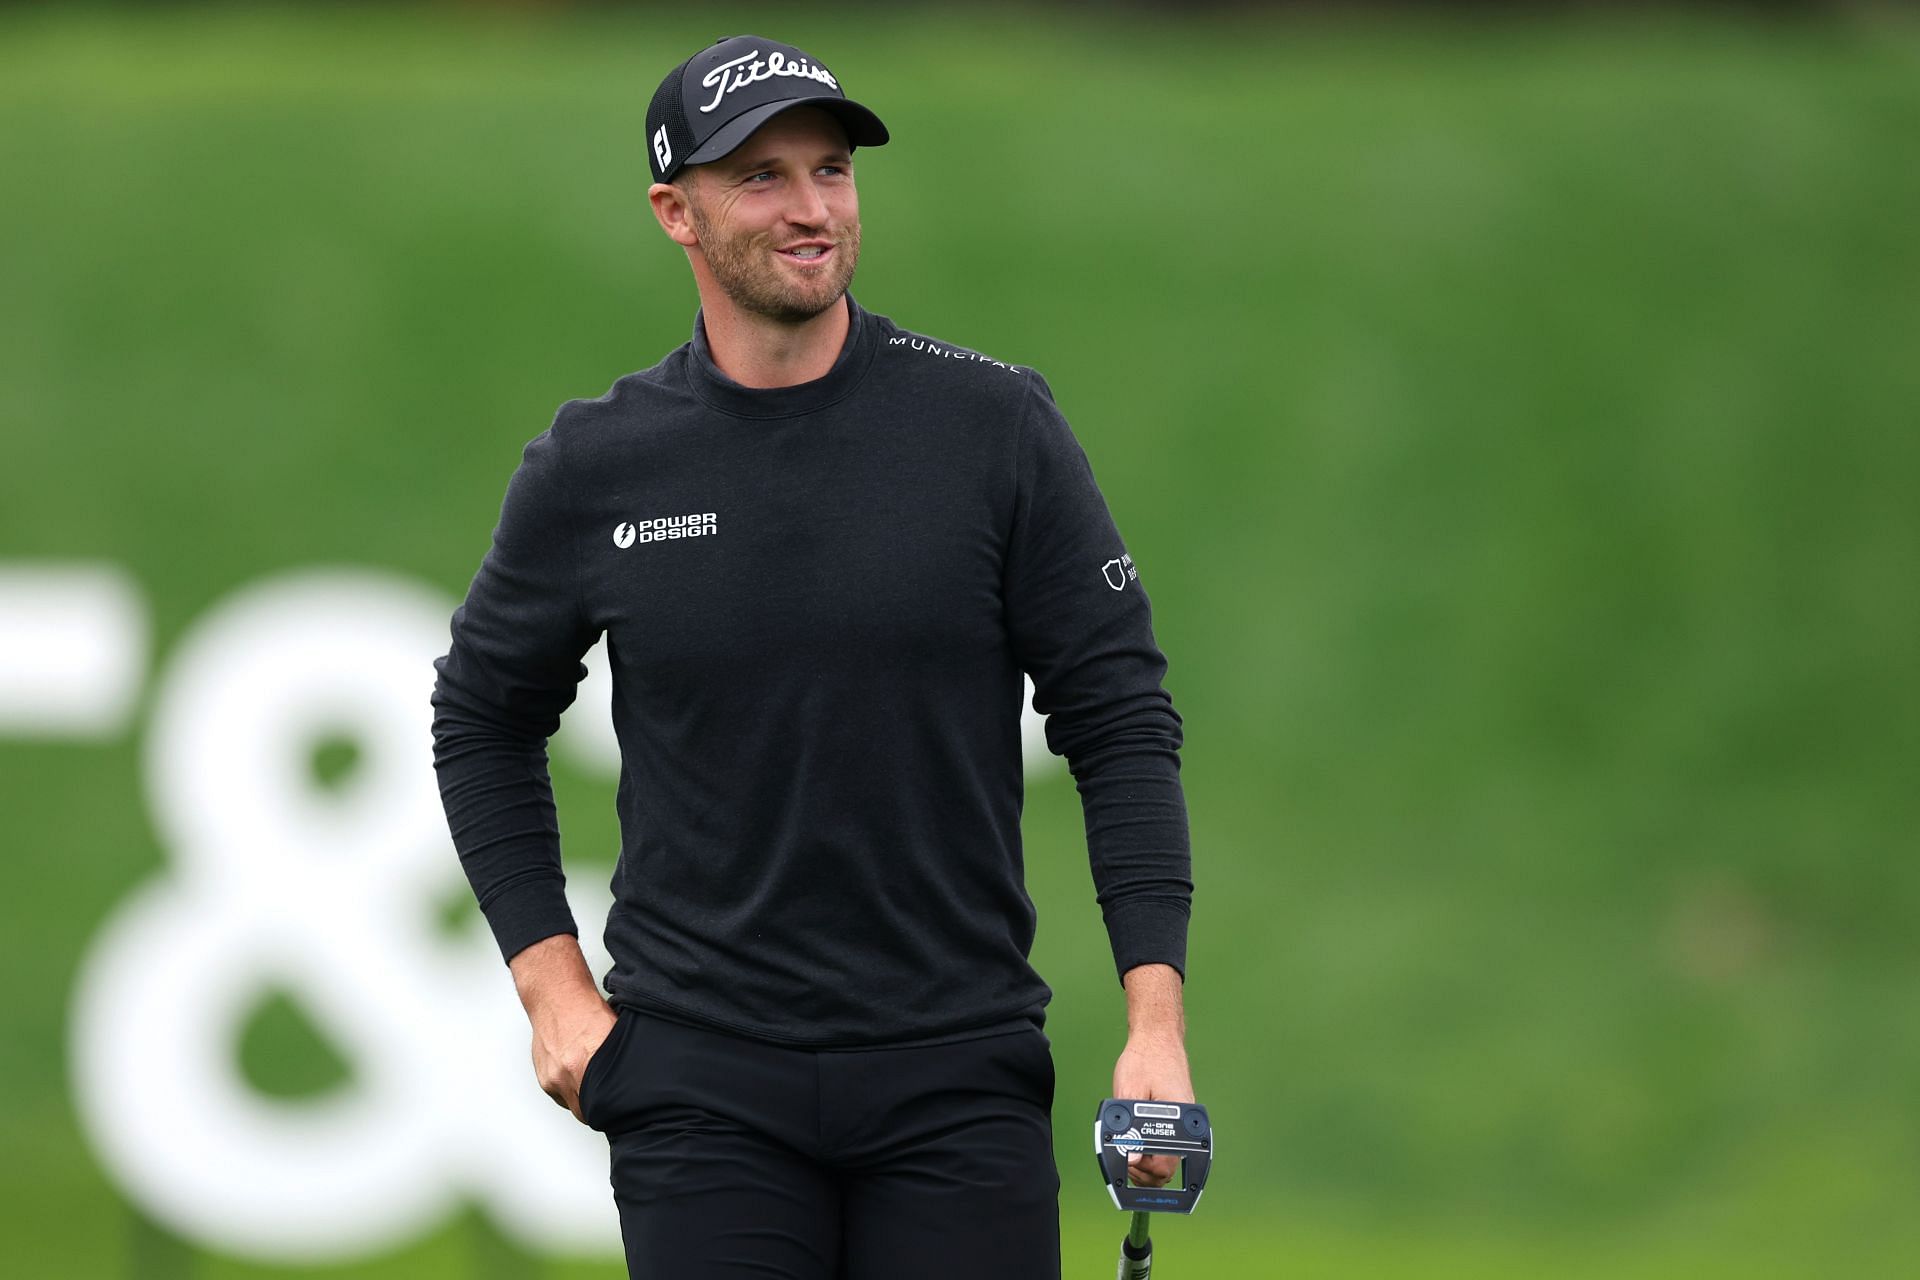 How much did Wyndham Clark win at the 2024 AT&T Pebble Beach ProAm